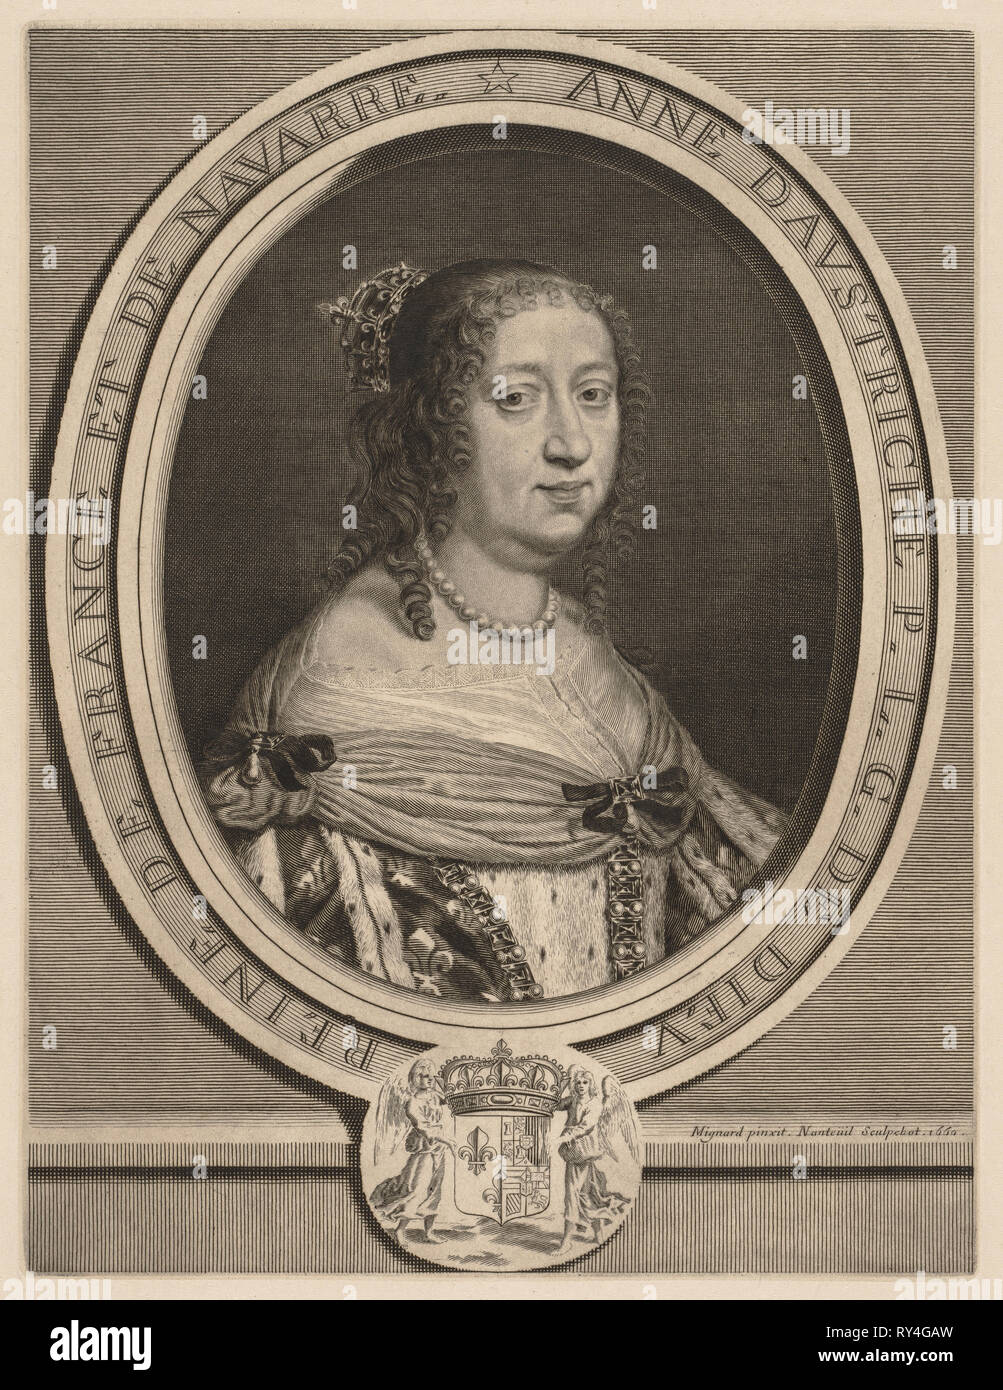 Anne of Austria, Queen of France, 1660. Robert Nanteuil (French, 1623-1678). Engraving Stock Photo